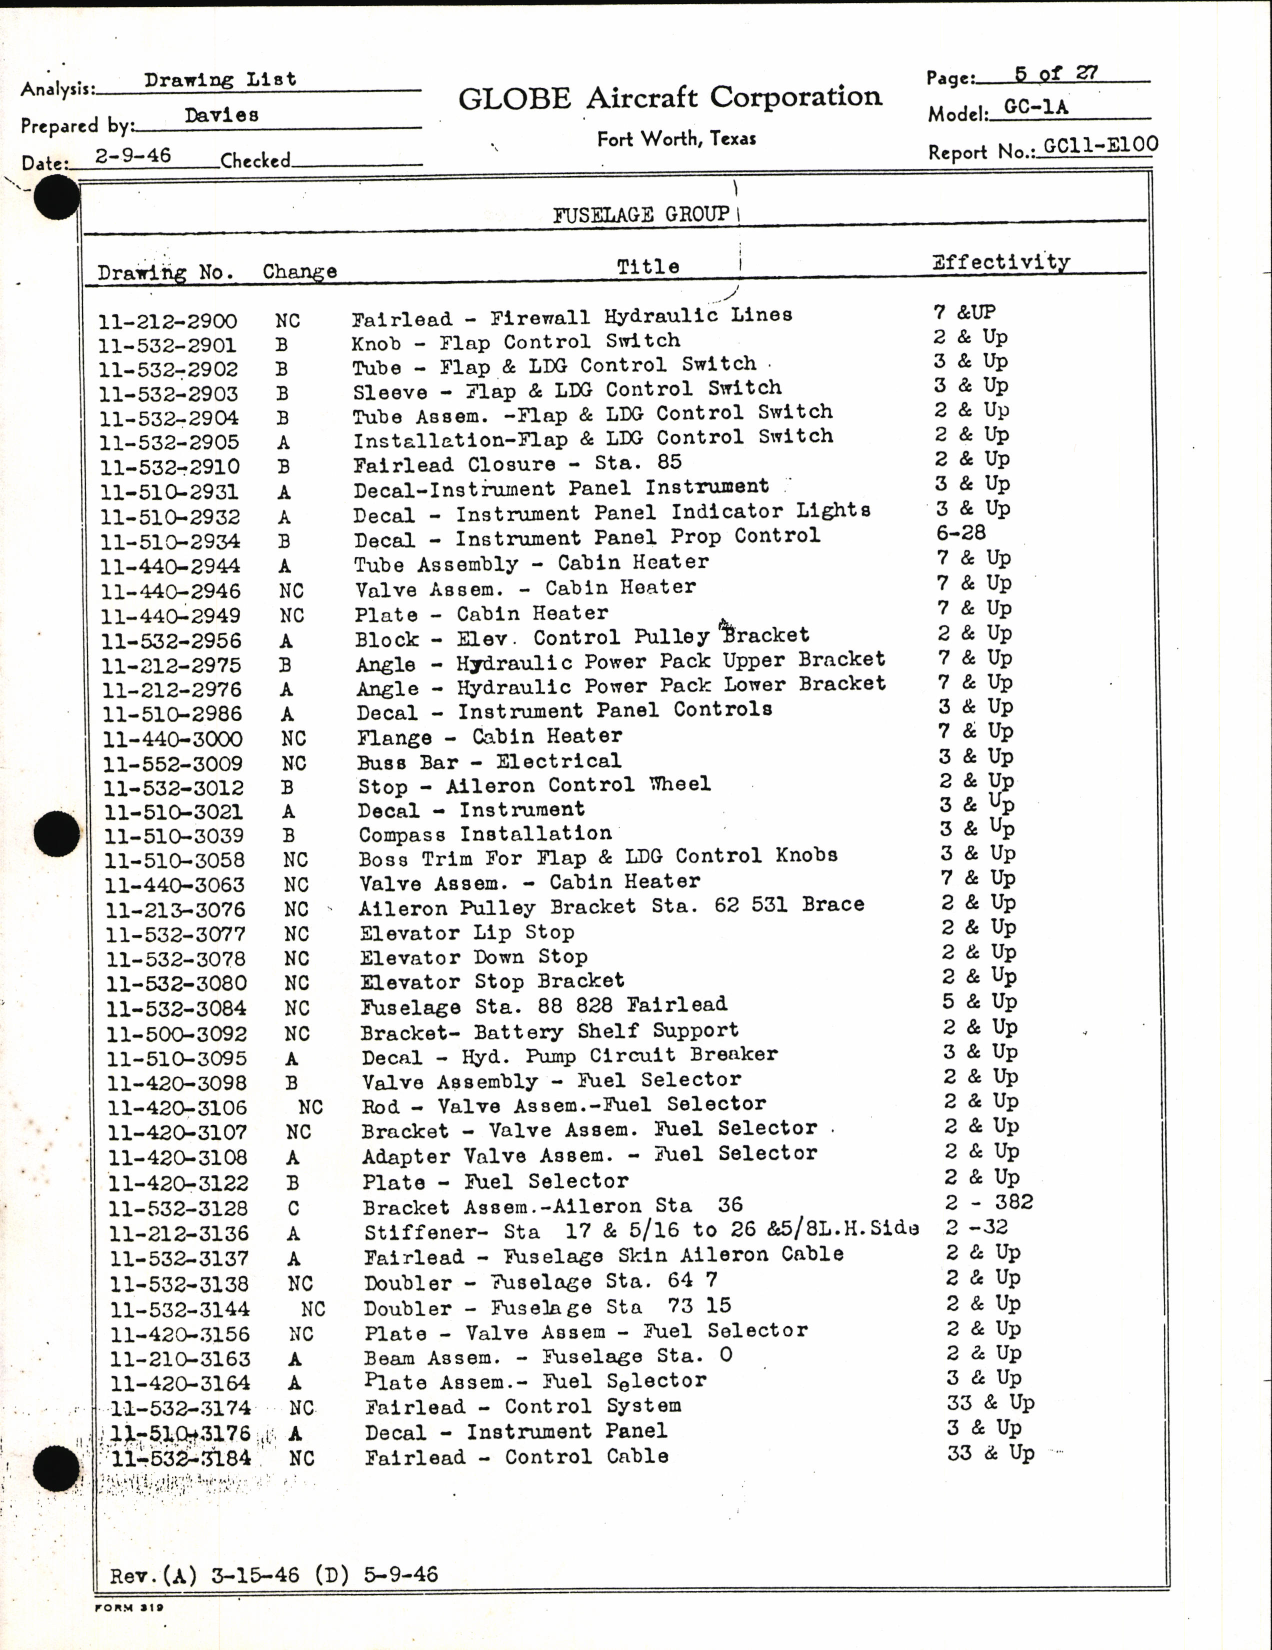 Sample page 8 from AirCorps Library document: Globe Drawing List